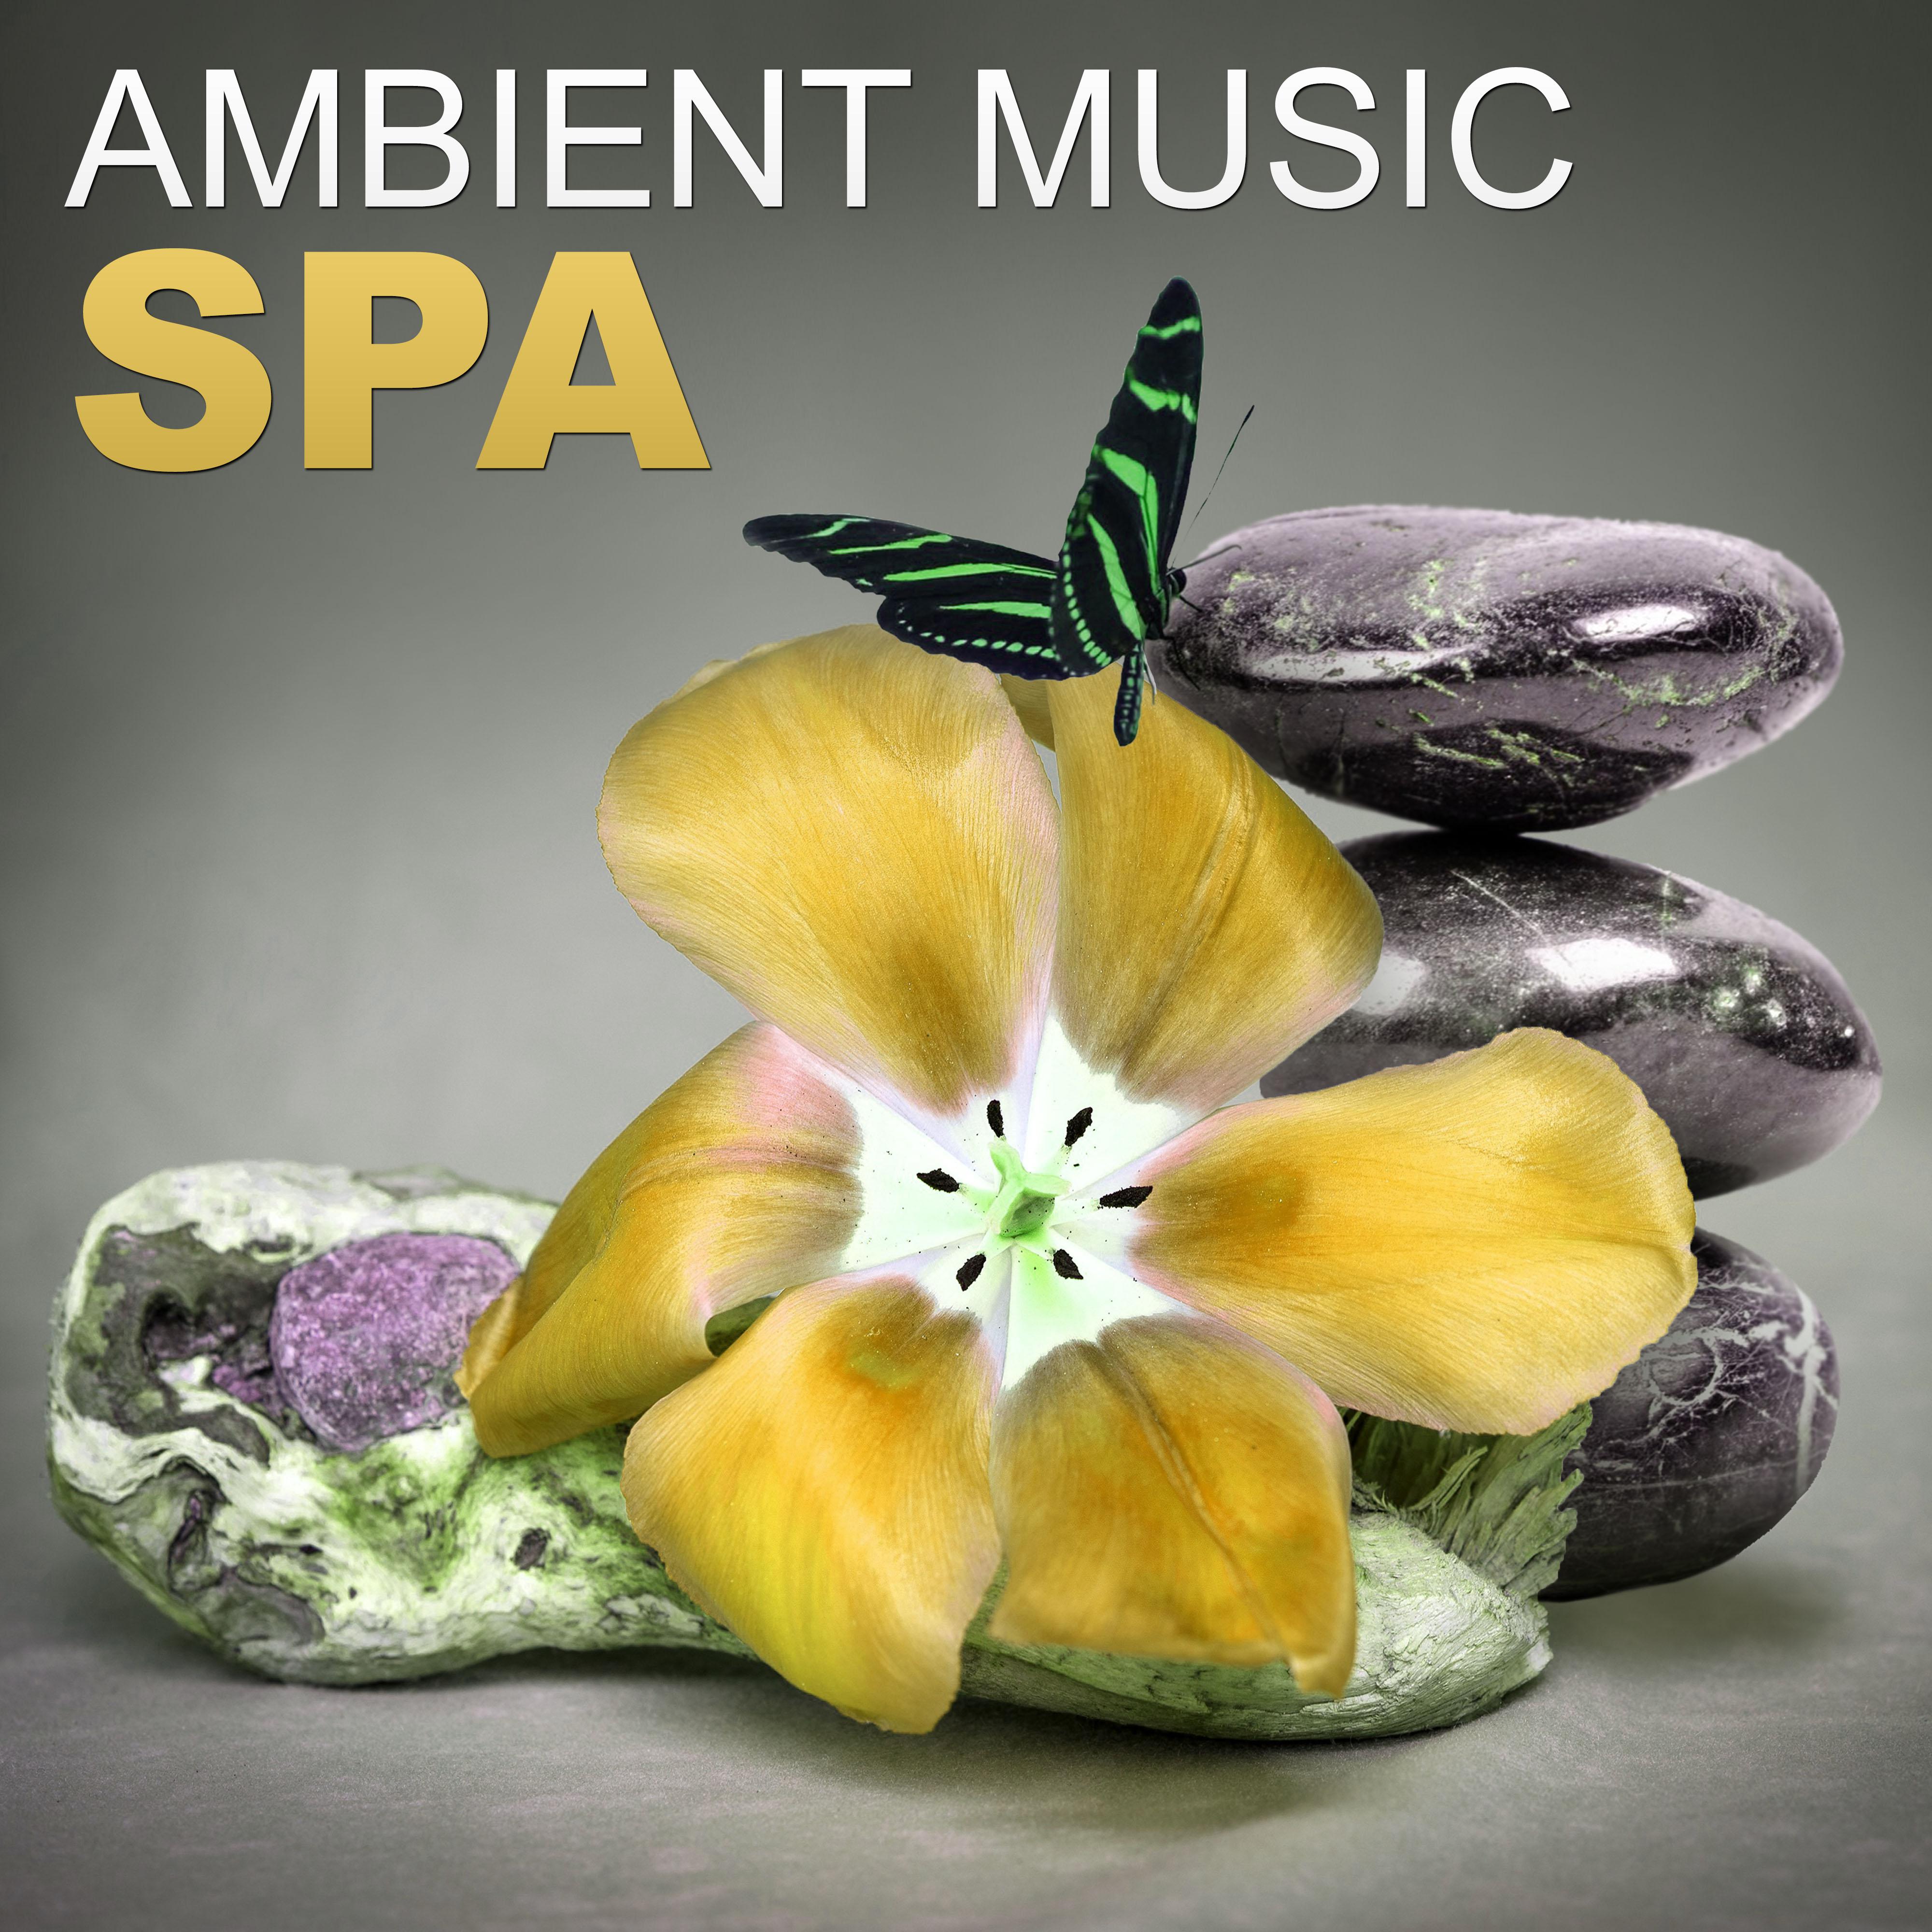 Ambient Music Spa– Sounds of Nature Relaxation, Therapy Healing Massage, Pure Healing, Rest, Wellness